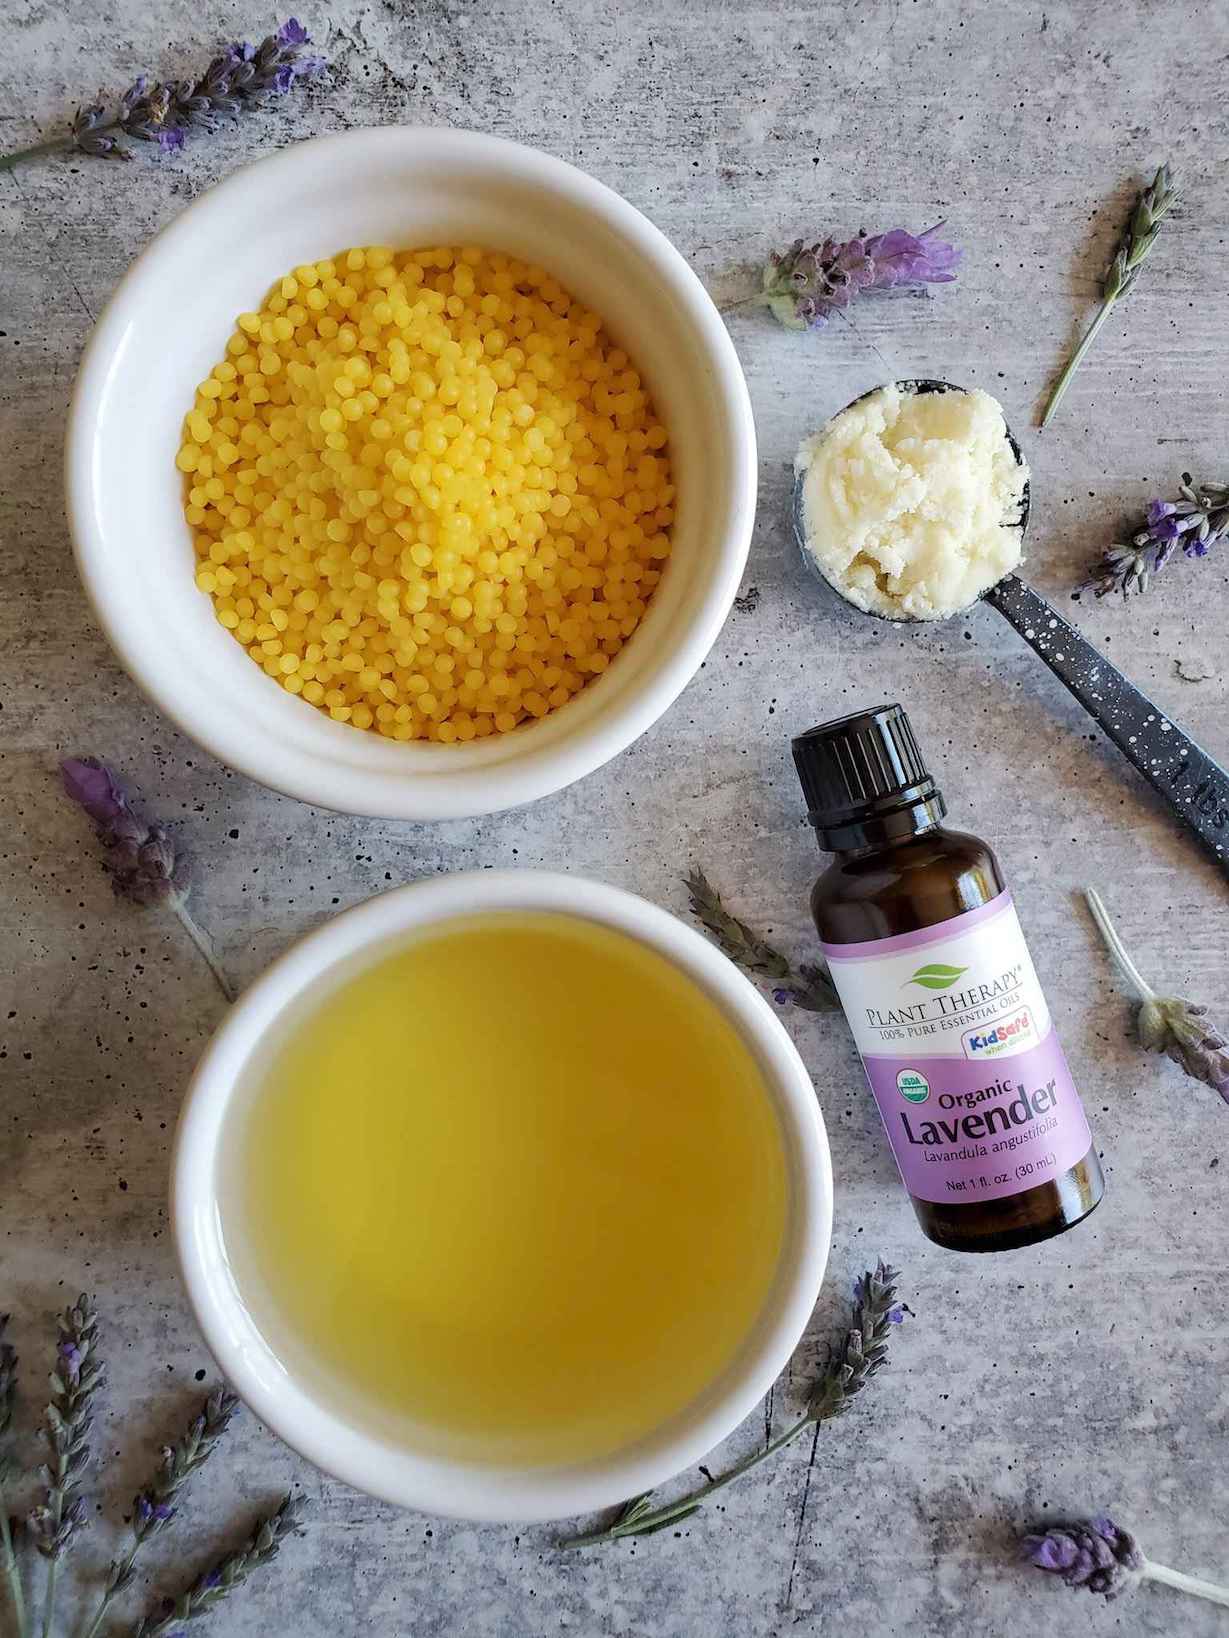 A birds eye view of two white ramekins, one is filled with beeswax pastilles while the other contains oil. A tablespoon measurement is laying off to the side full of shea butter while a bottle of lavender essential oils is laying face up nearby. A number of dried lavender flowers are scattered throughout the scene. 